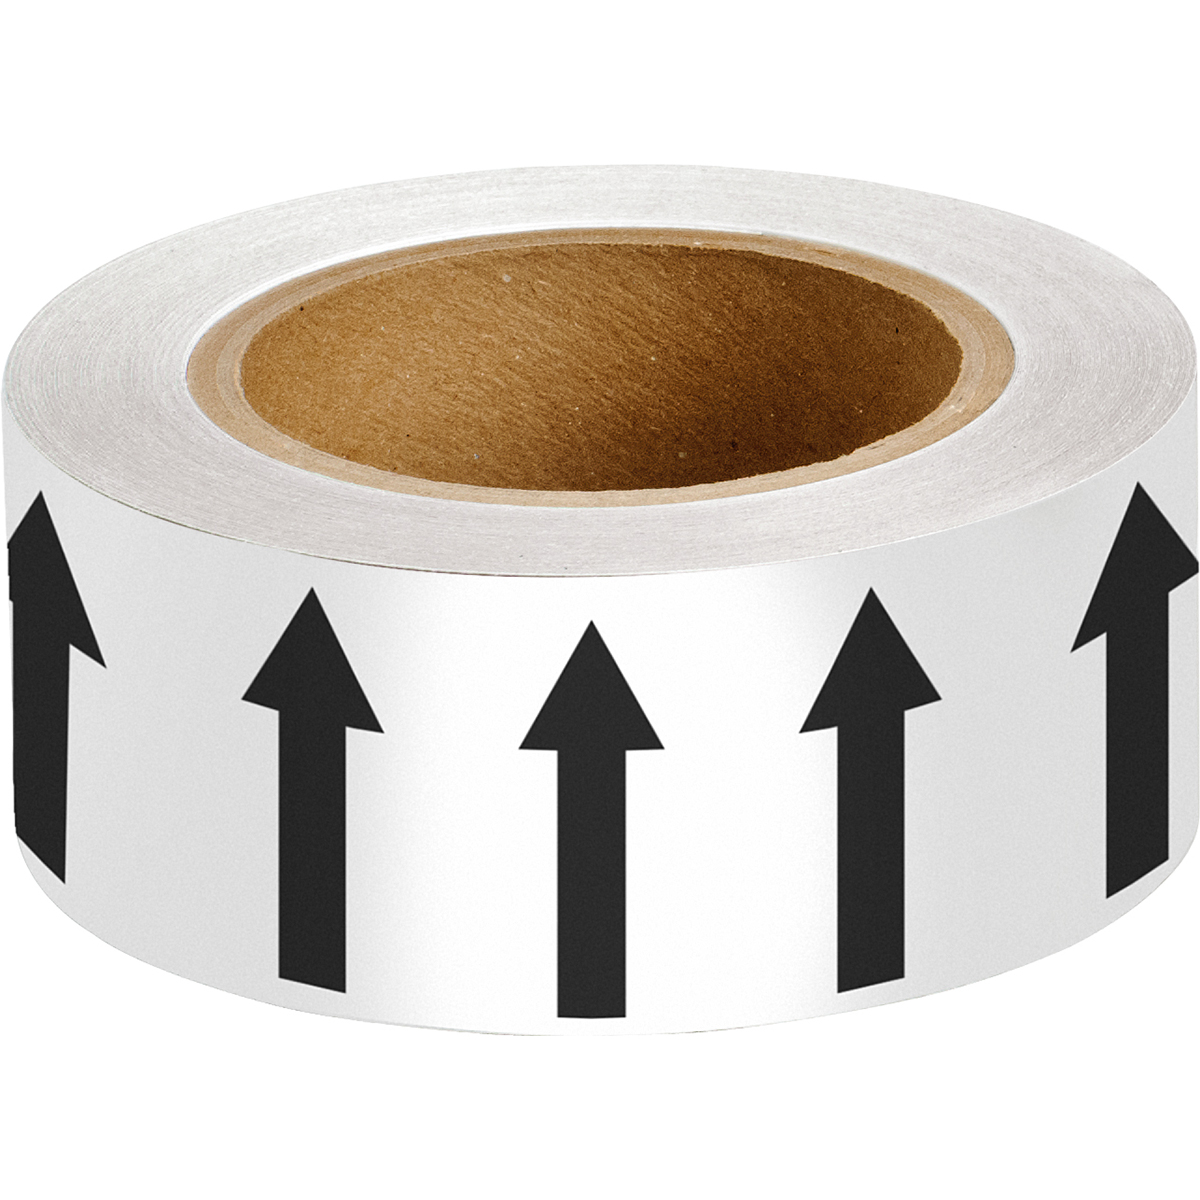 Black on White 50mm Directional Flow Arrow Tape